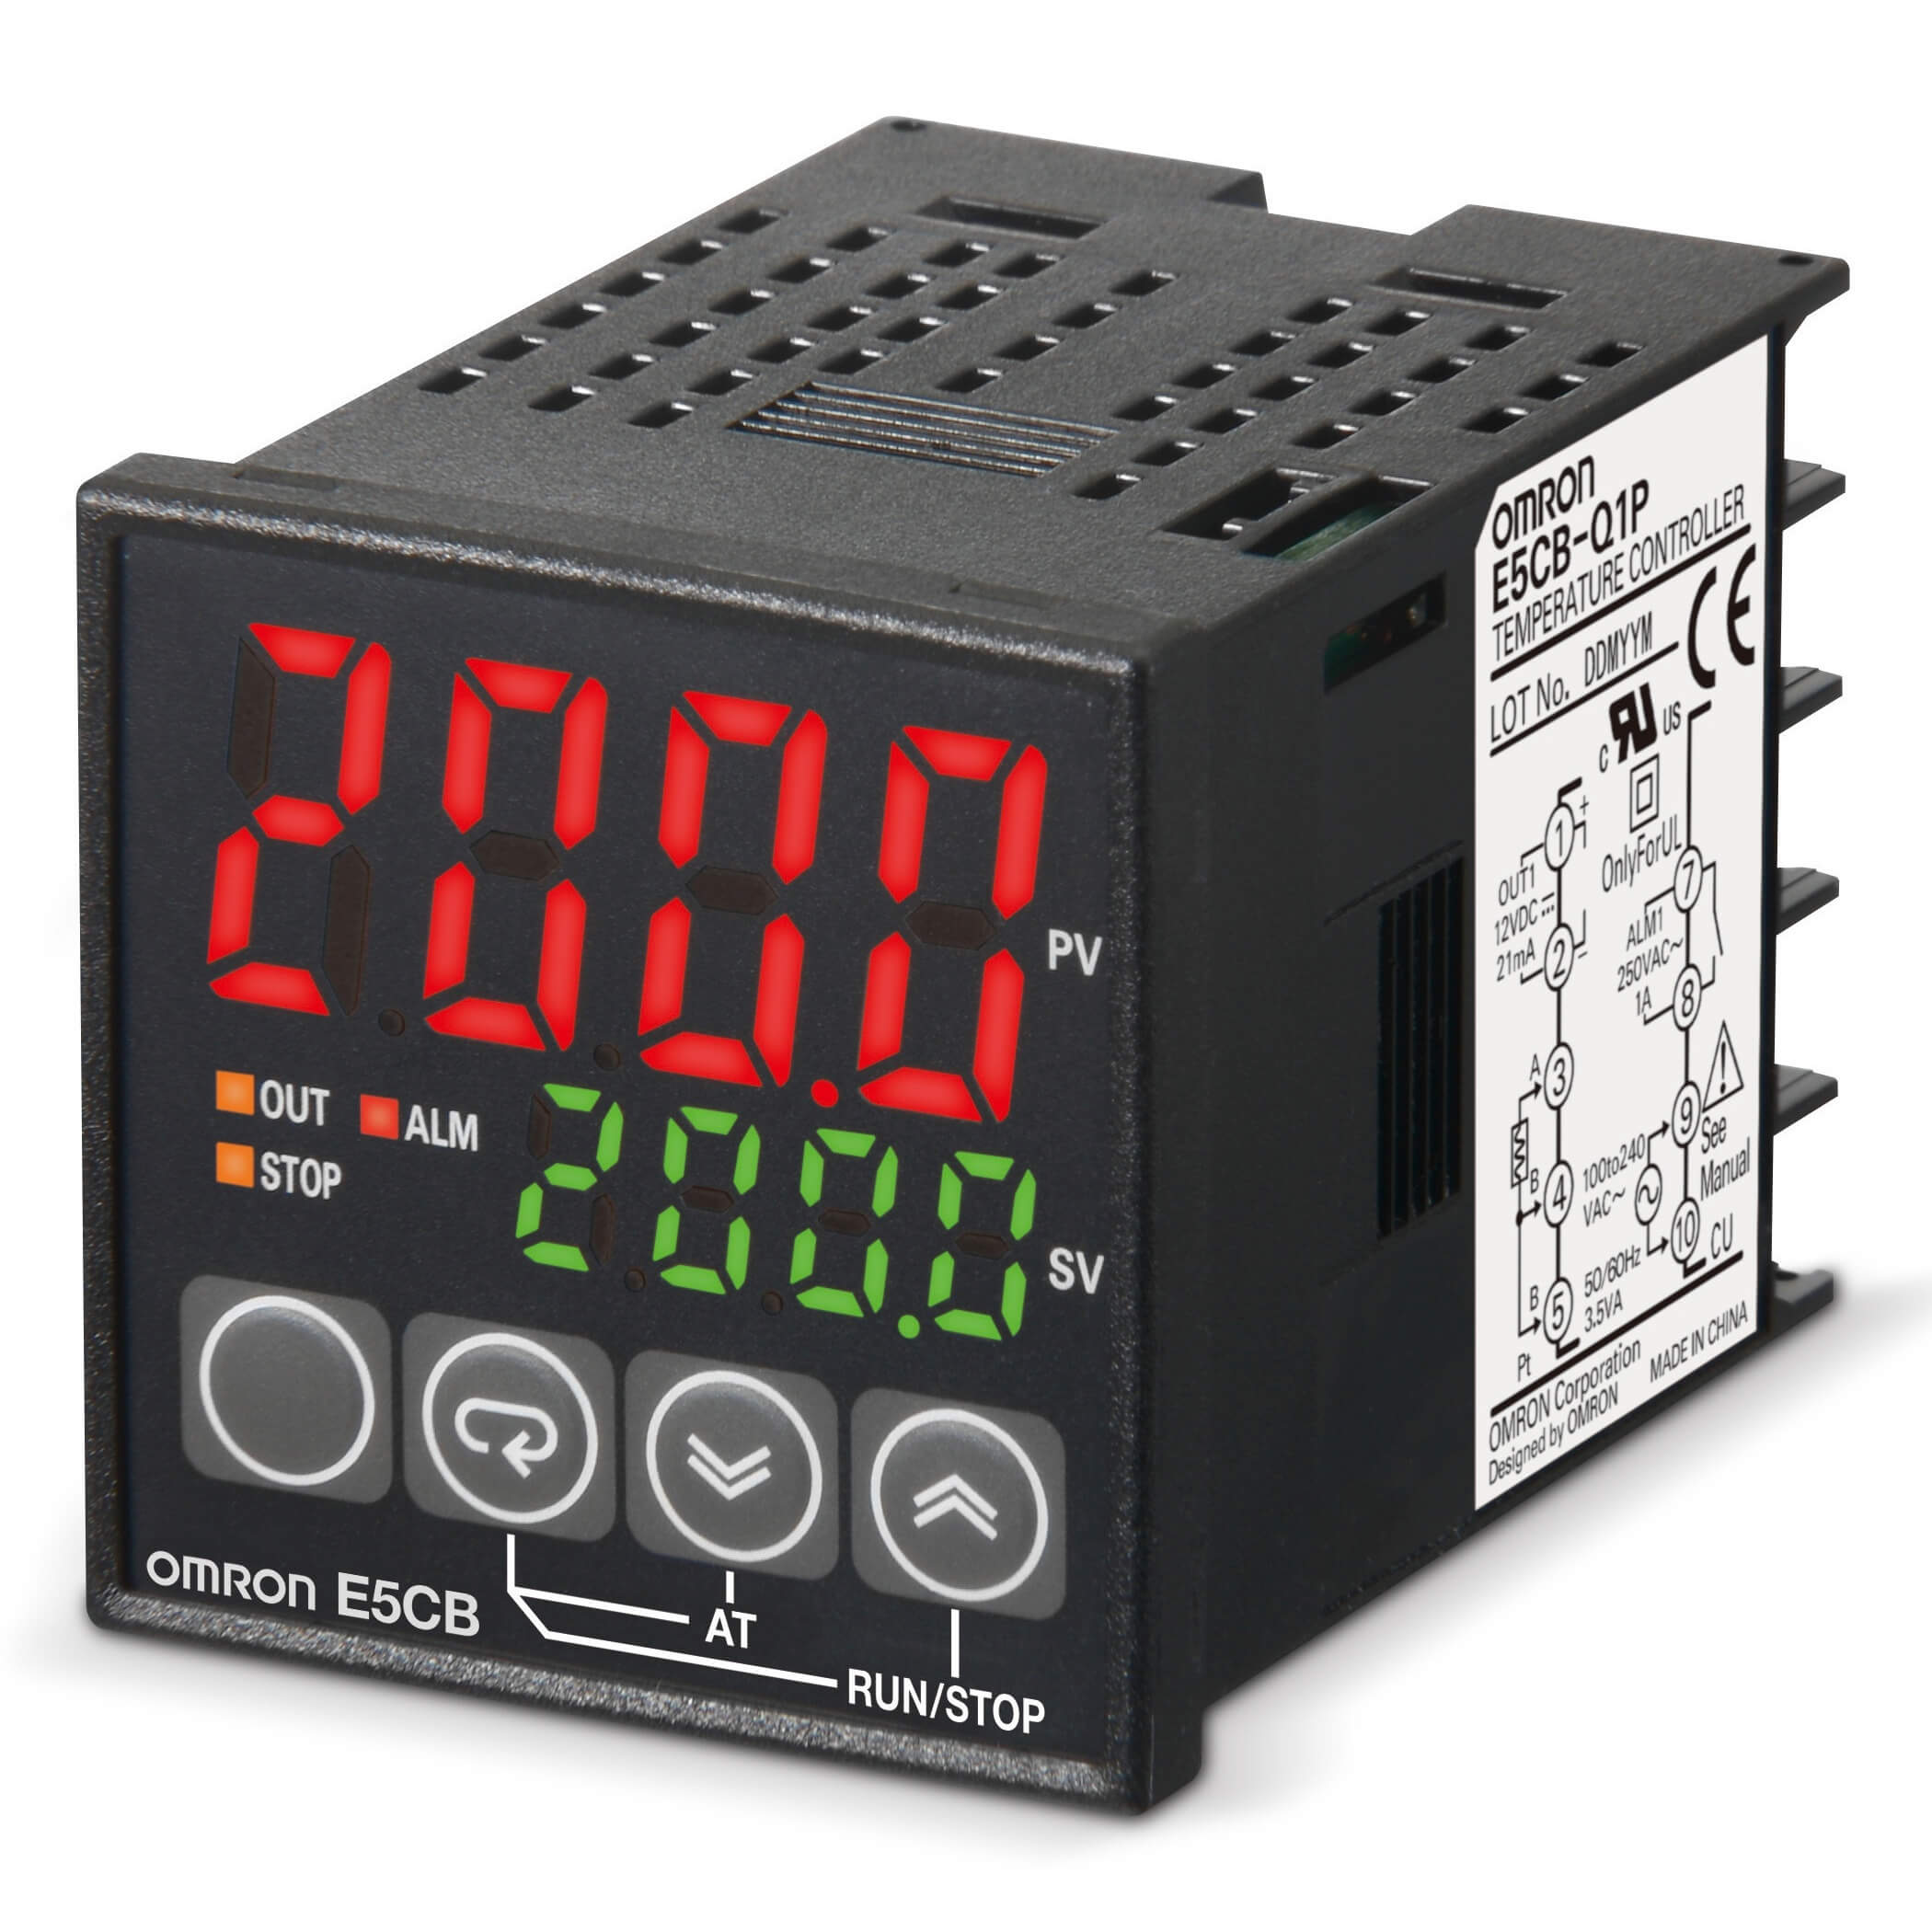 Temp. controller, LITE, 1/16DIN (48 x 48mm), relay output, ON/OFF or PID Control, Pt100 RTD input, 1